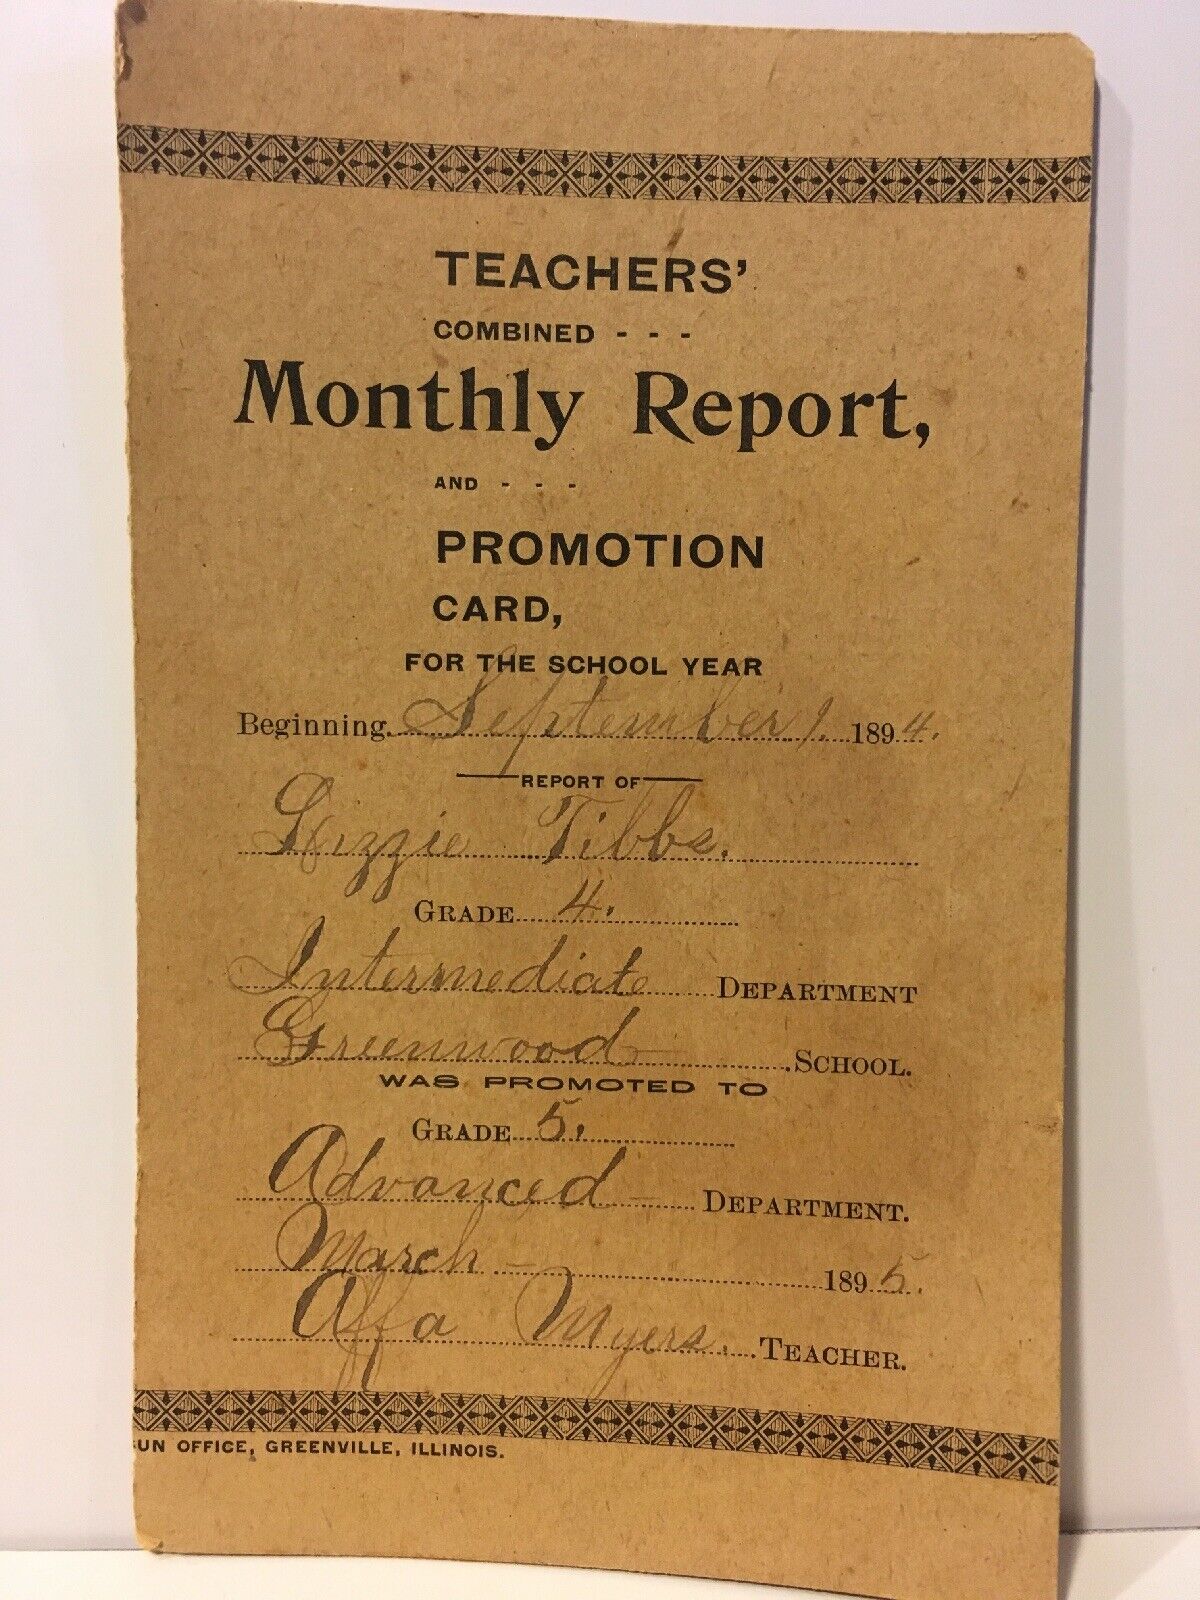 Antique Teachers Monthly Report Promotion Card 1894-1895, Greenville Illinois